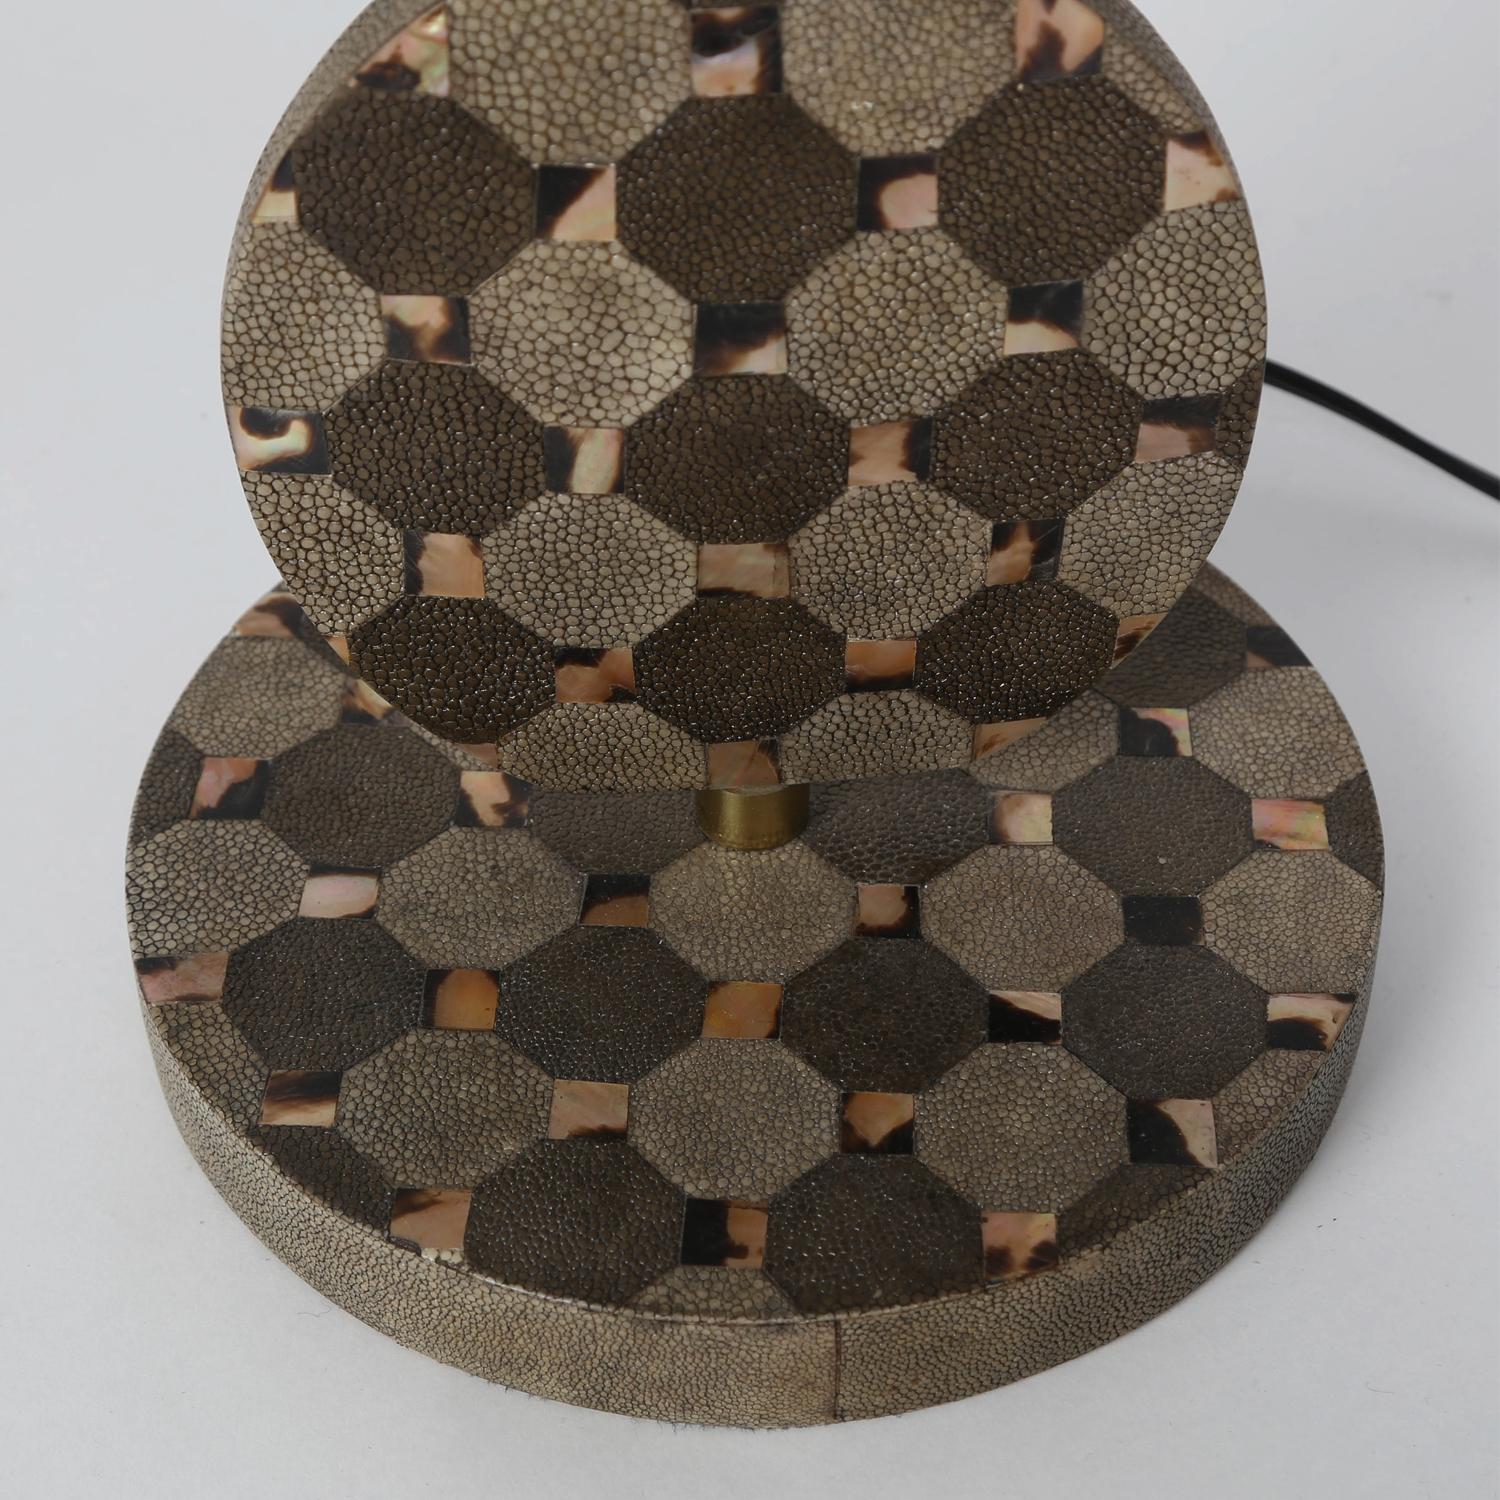 Sculptural Table Lamp in Shagreen and Horn with Brass Fittings, 1980s In Excellent Condition For Sale In New York, NY